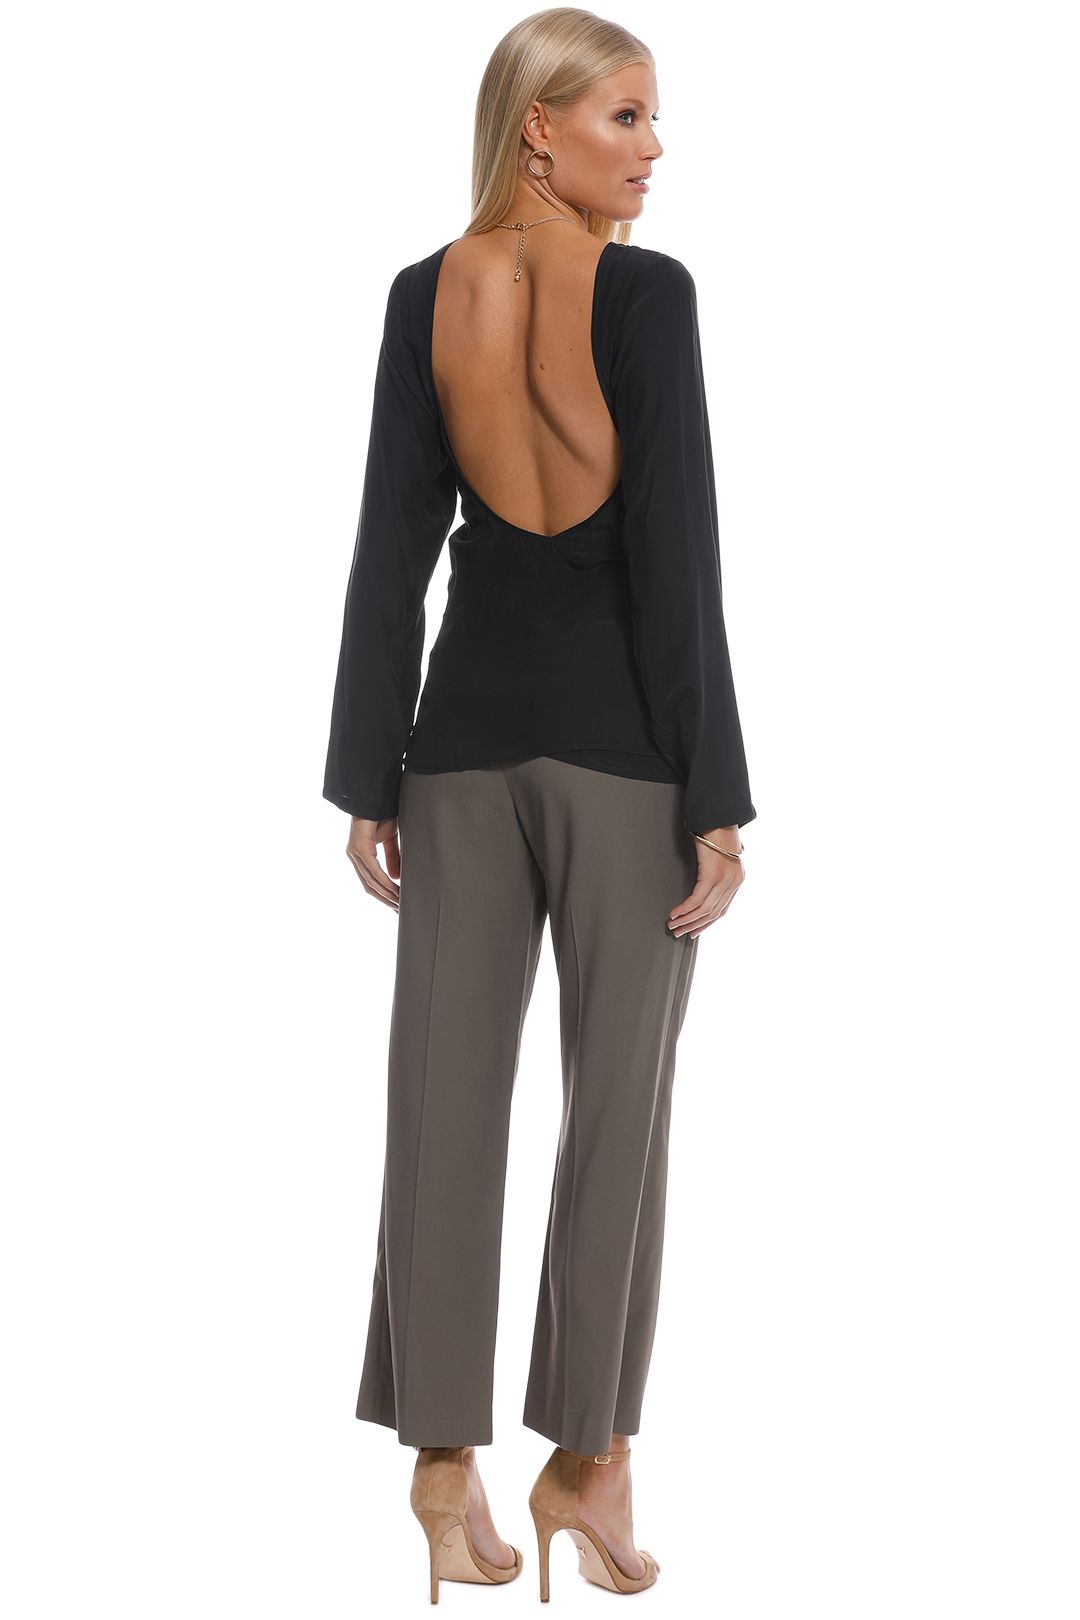 SIR the Label - Margeaux Long Sleeve Wrap Top - Black - Back